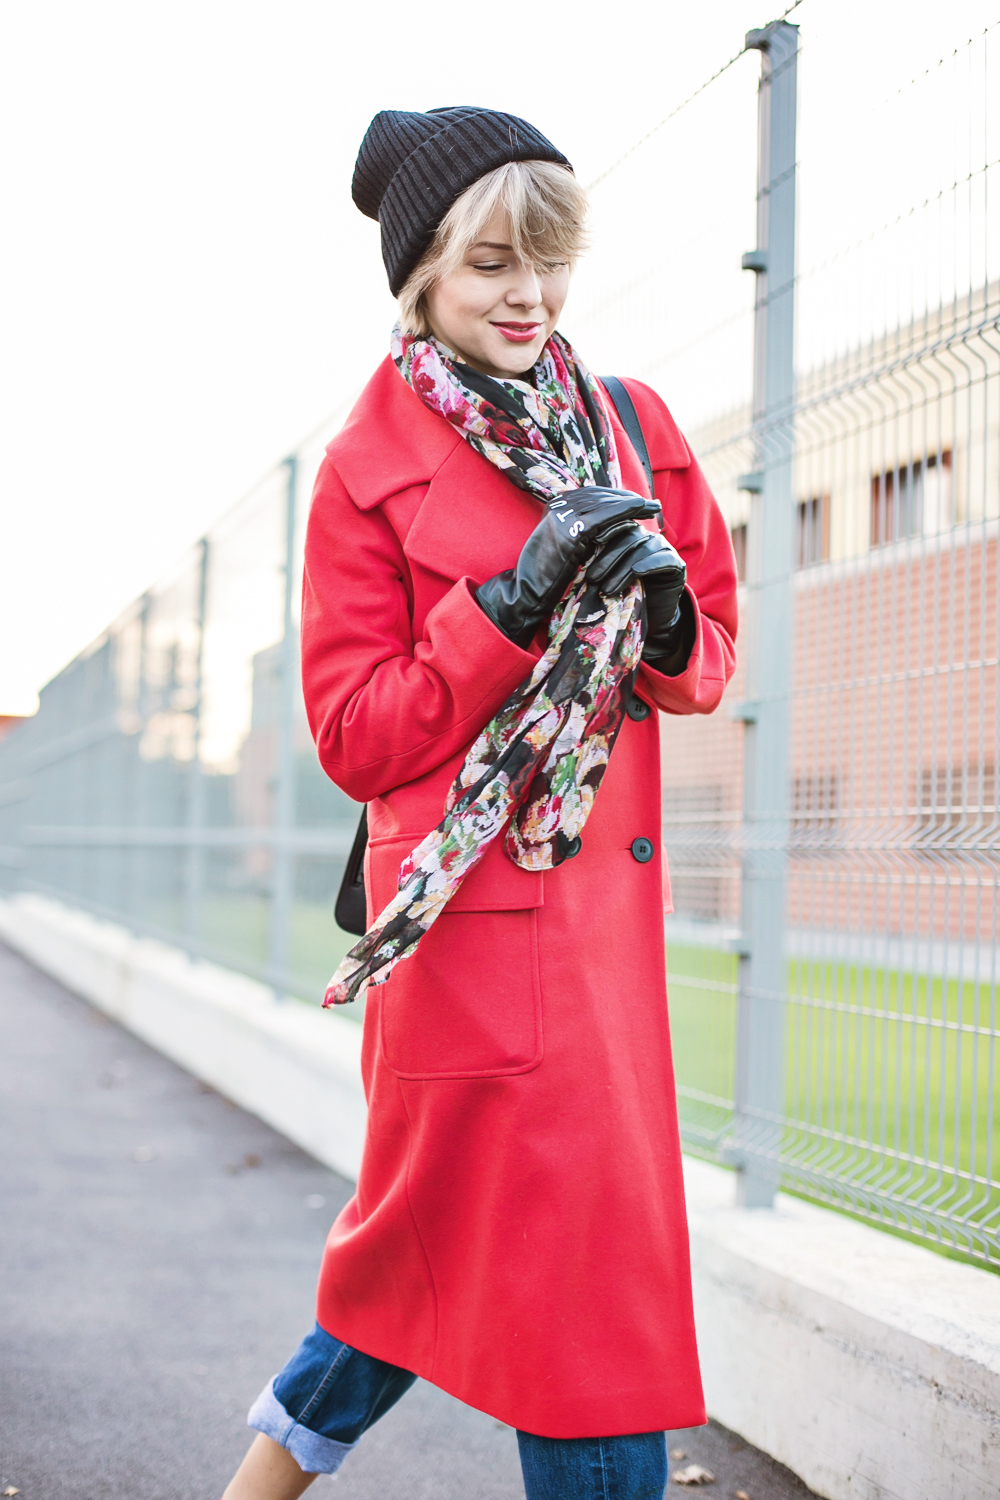 darya kamalova thecablook fashion blog russian blogger italy moda street style pixie short hair fashion blogger asos red long coat boyfriend beanie stunning gloves roses scarf jeand levis proenza schouler ps11 bag cheap monday sneakers-7 копия